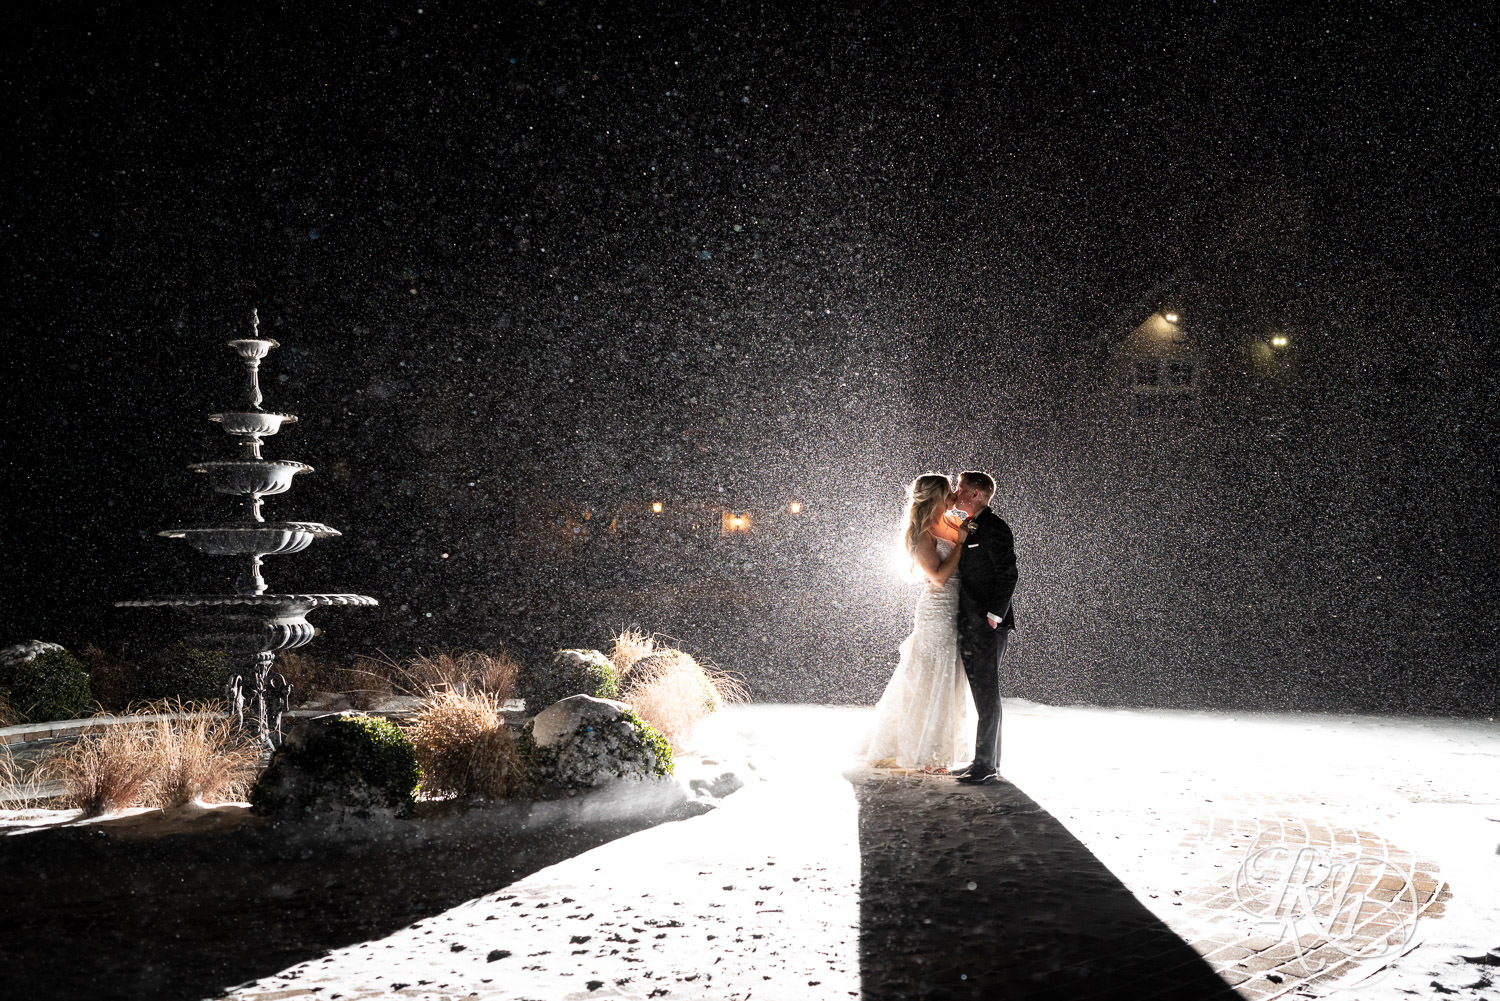 Bride and groom kiss during winter wedding photos in the snow at night at Bavaria Downs in Chaska, Minnesota.